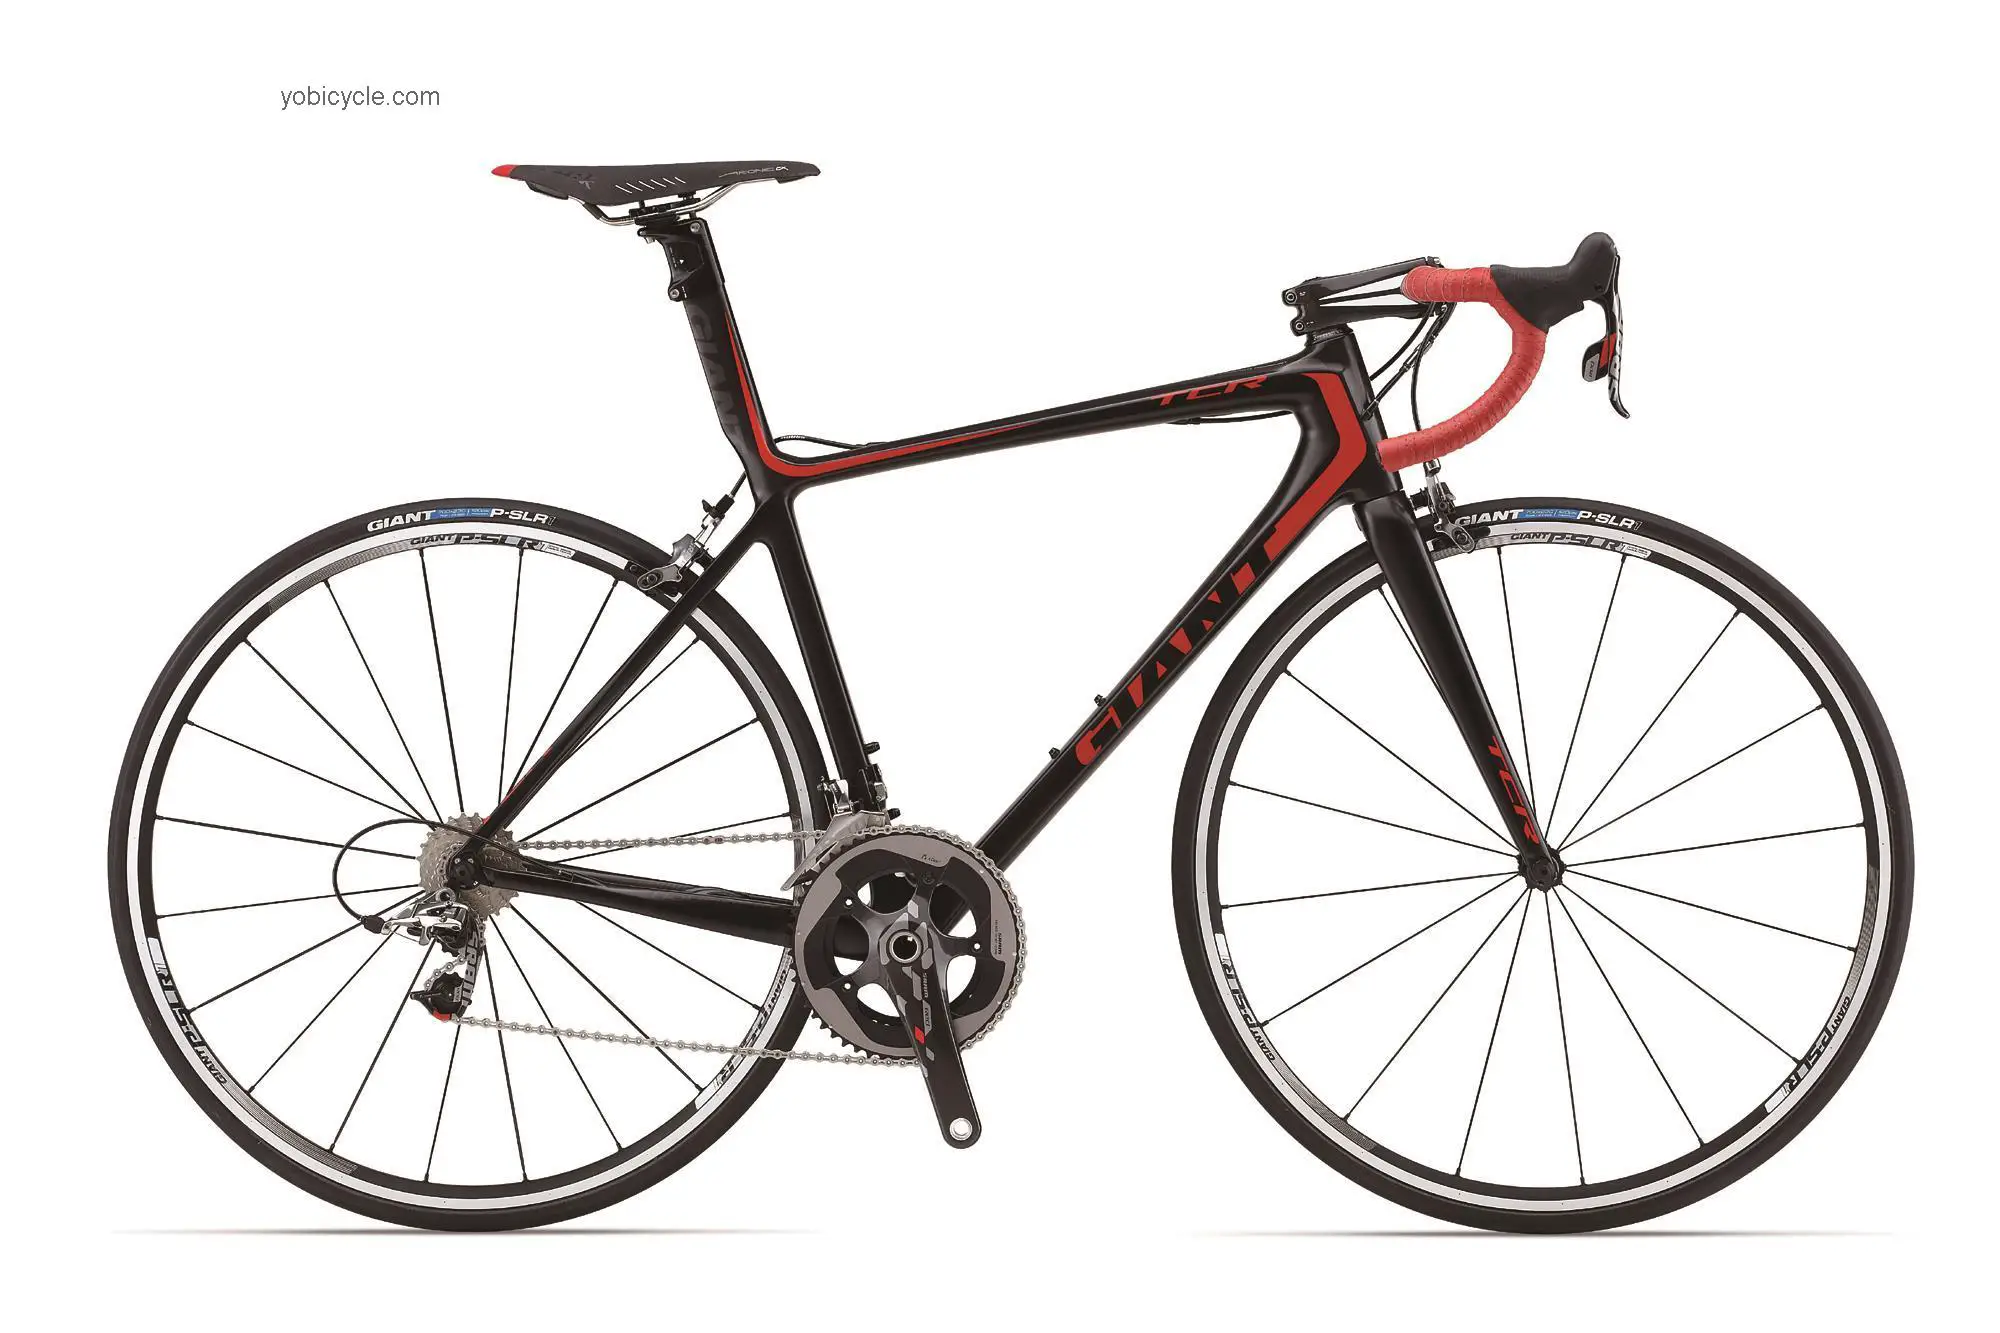 Giant TCR Advanced SL 2 2013 comparison online with competitors